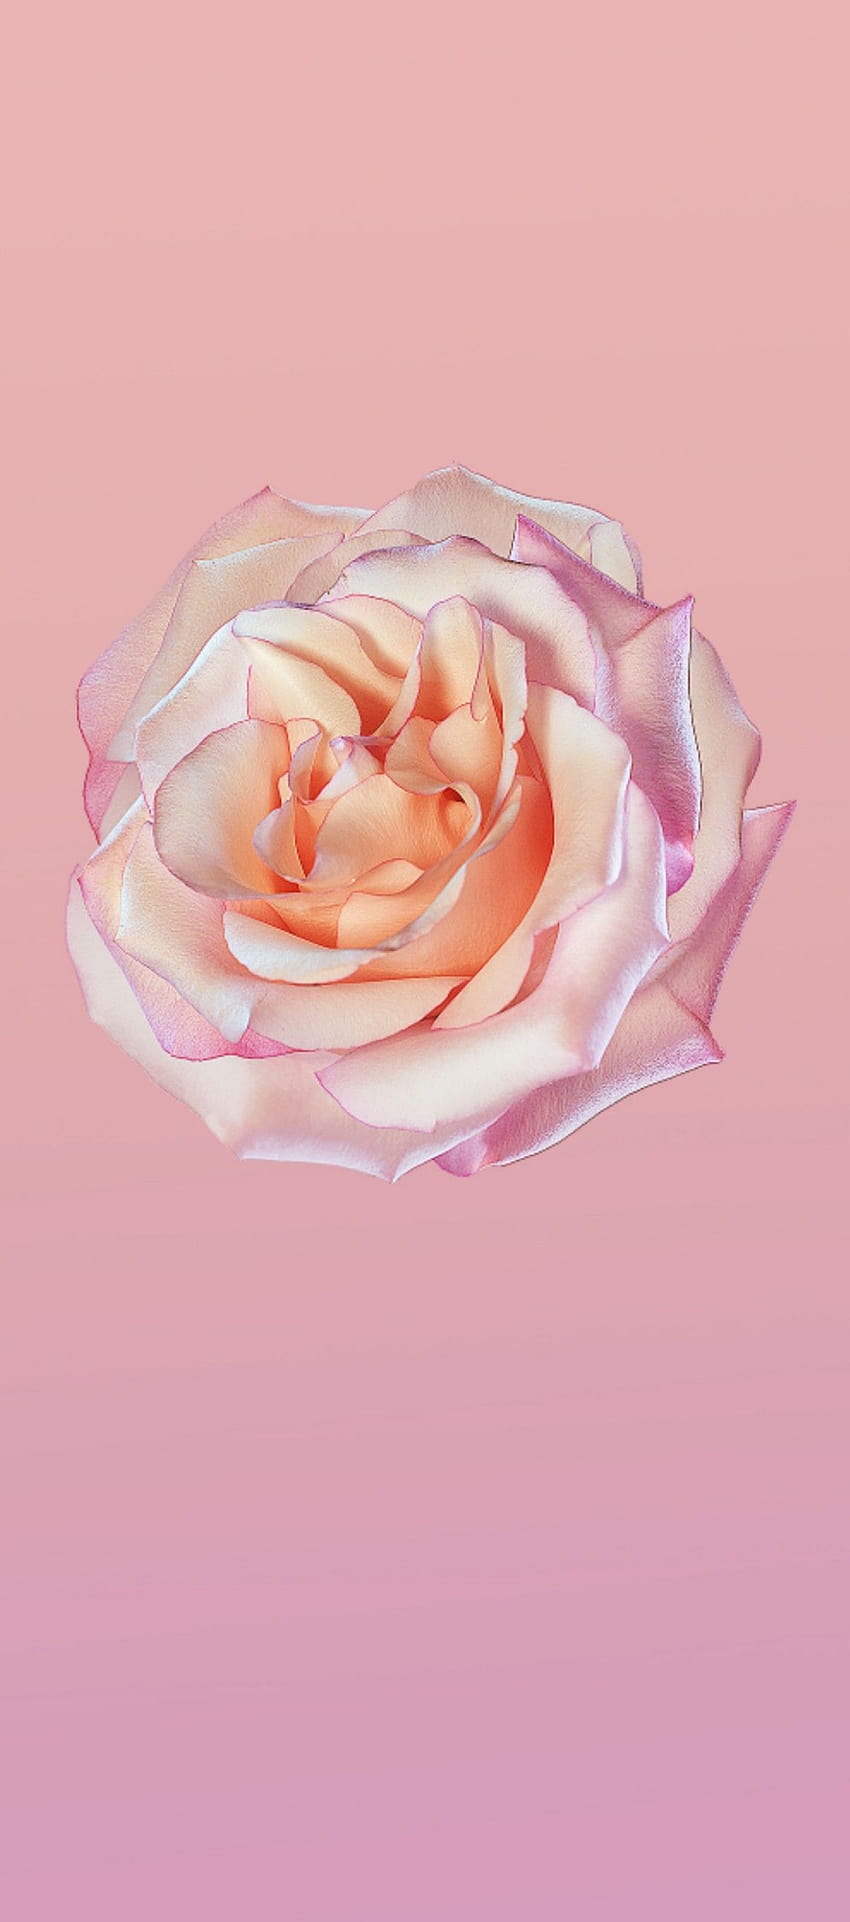 iOS 11, iPhone X, rose, pink, clean, simple, abstract, apple, iphone 8, clean, beauty, c…, pink iphone 11 HD phone wallpaper